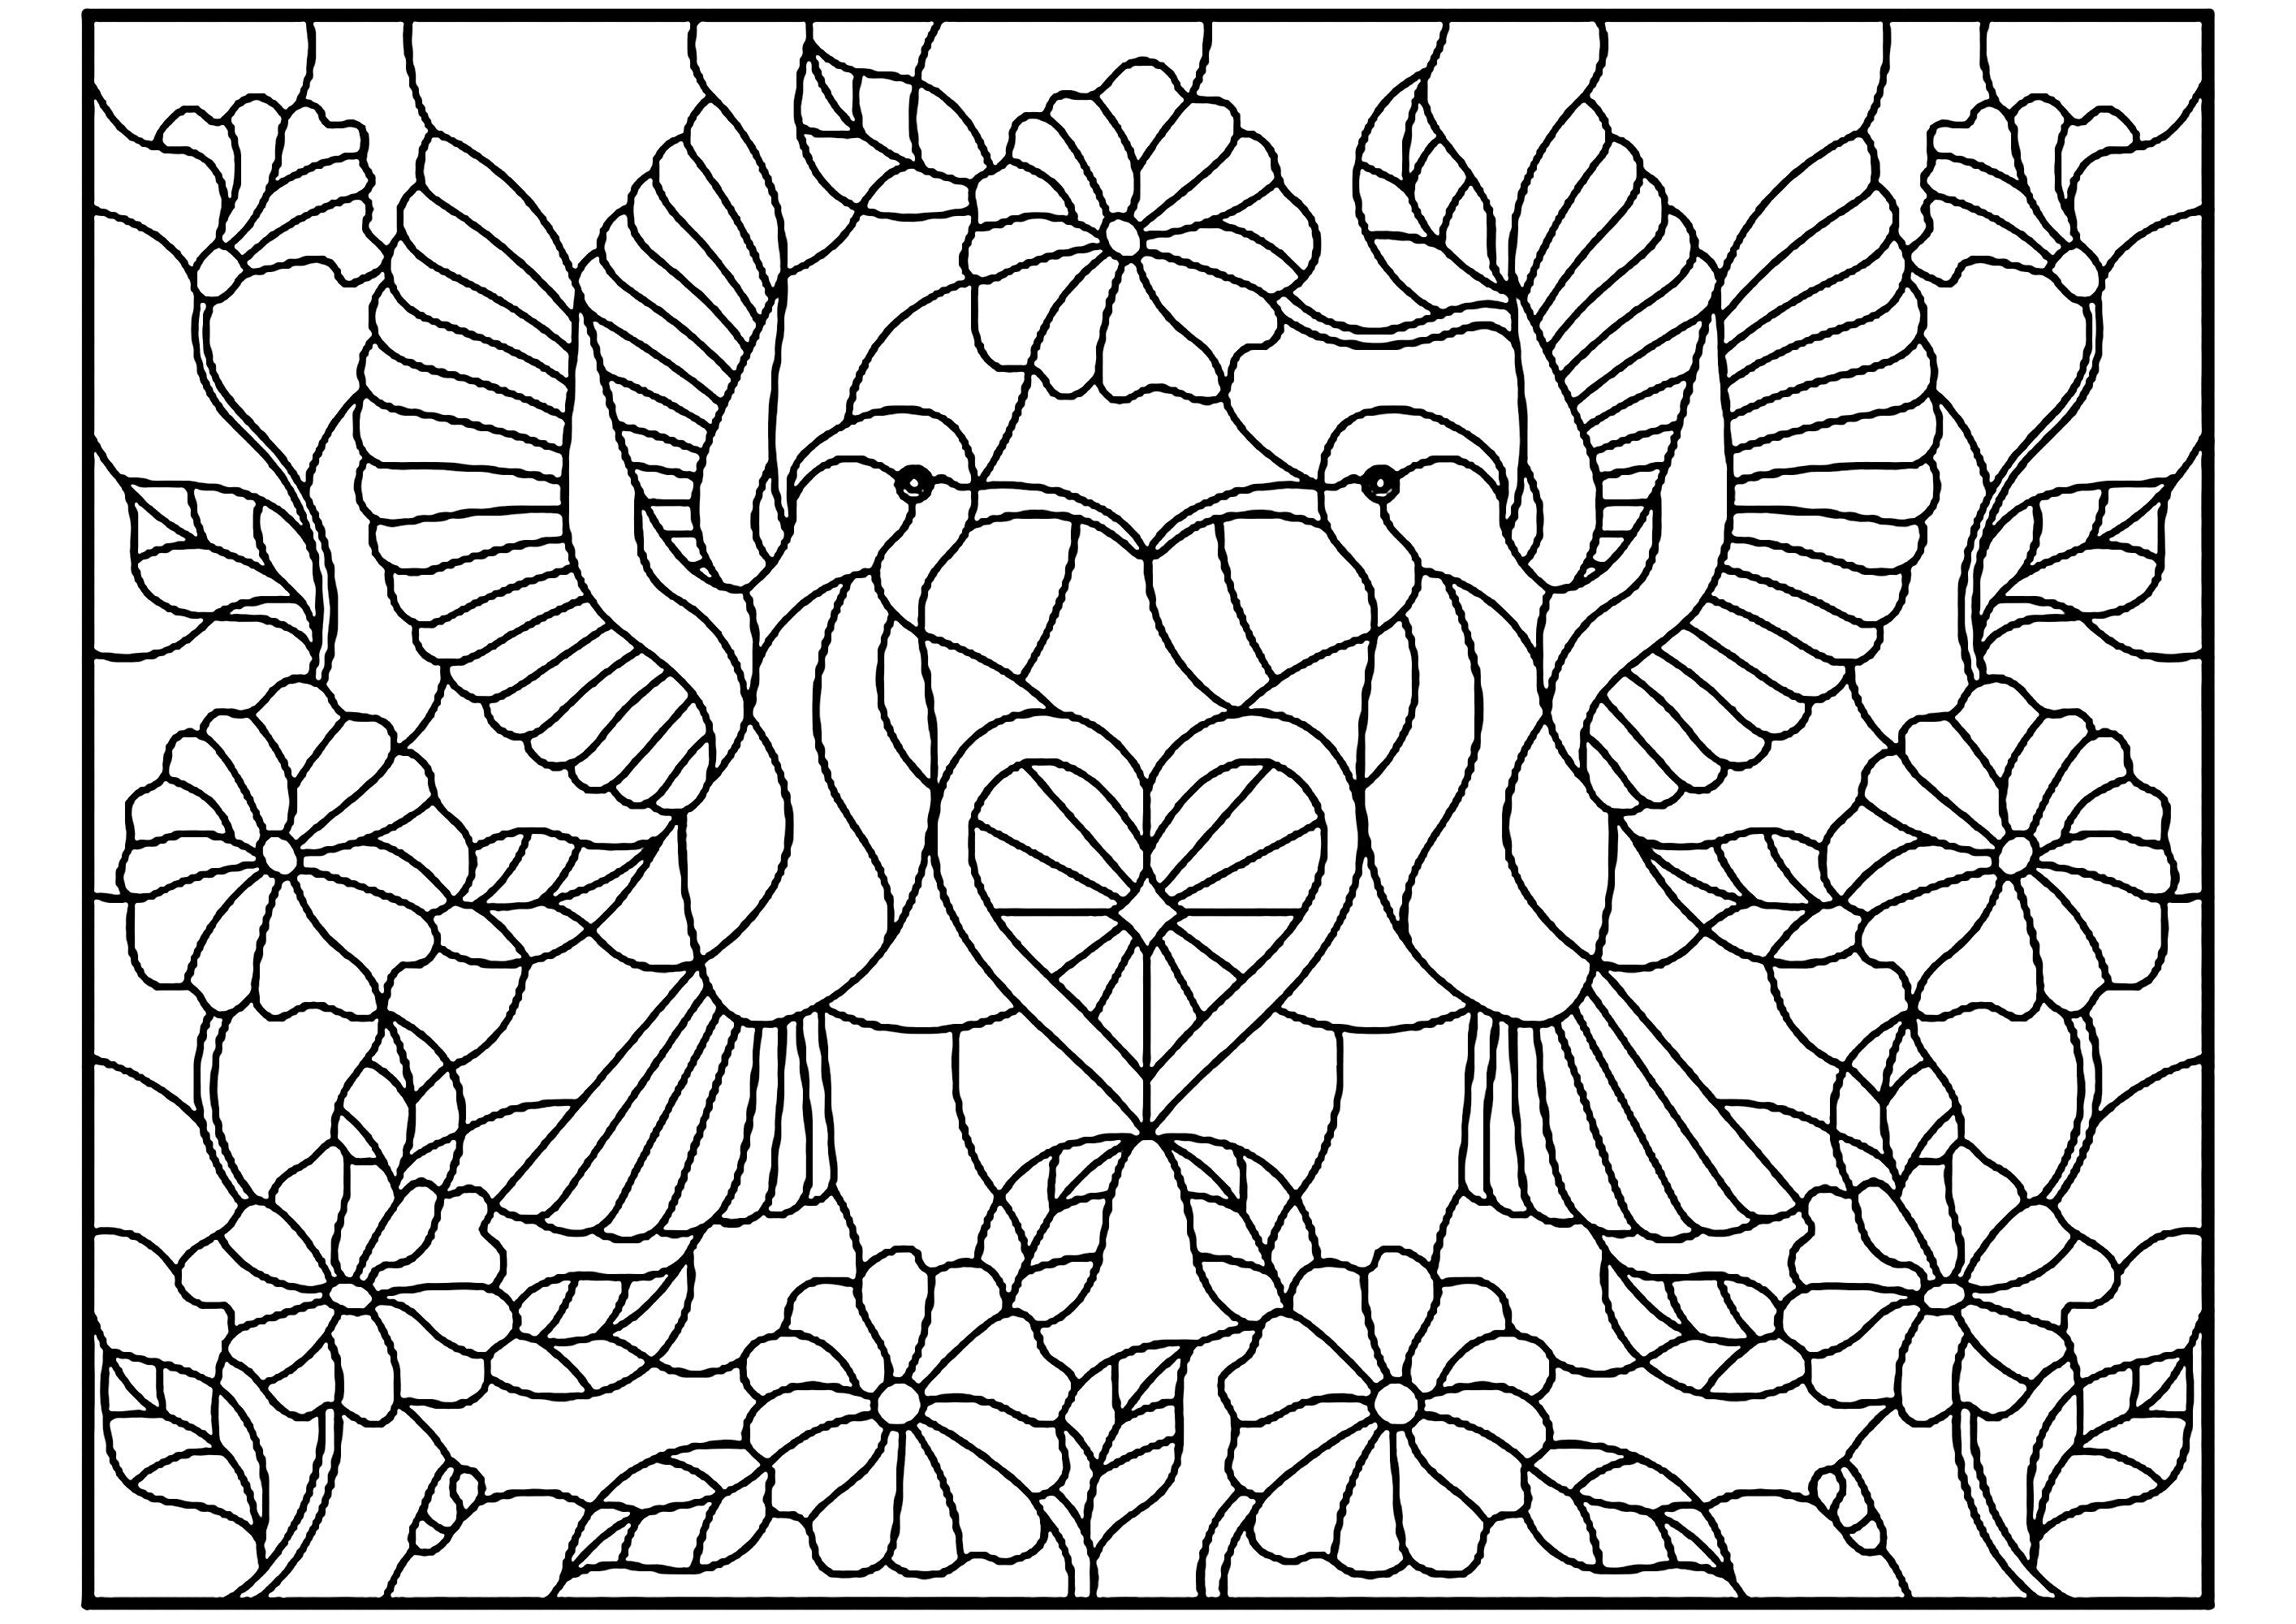 Two birds and a small heart in the center, stained glass style. Perfect symmetry for a coloring scheme that will undoubtedly produce an exceptional final result, Source : 123rf   Artist : zagory